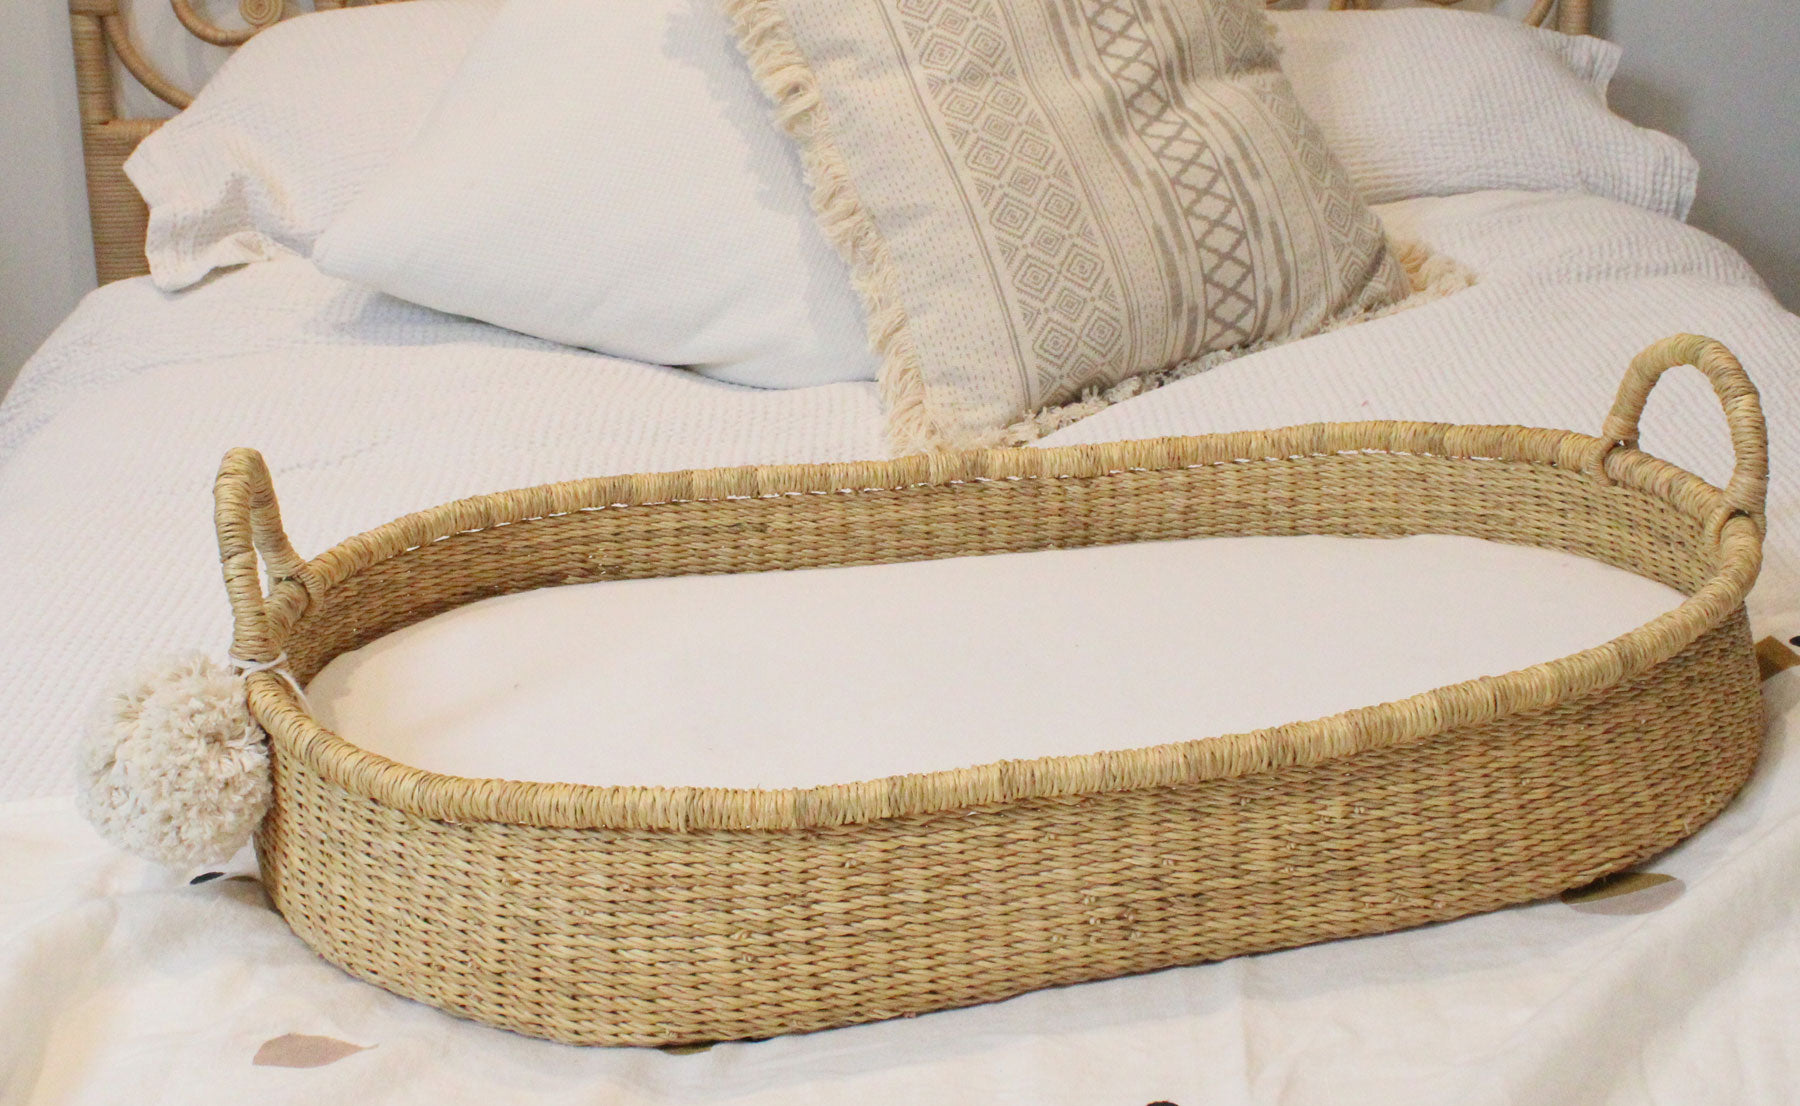 Handwoven vegan baby changing basket for nappy changing